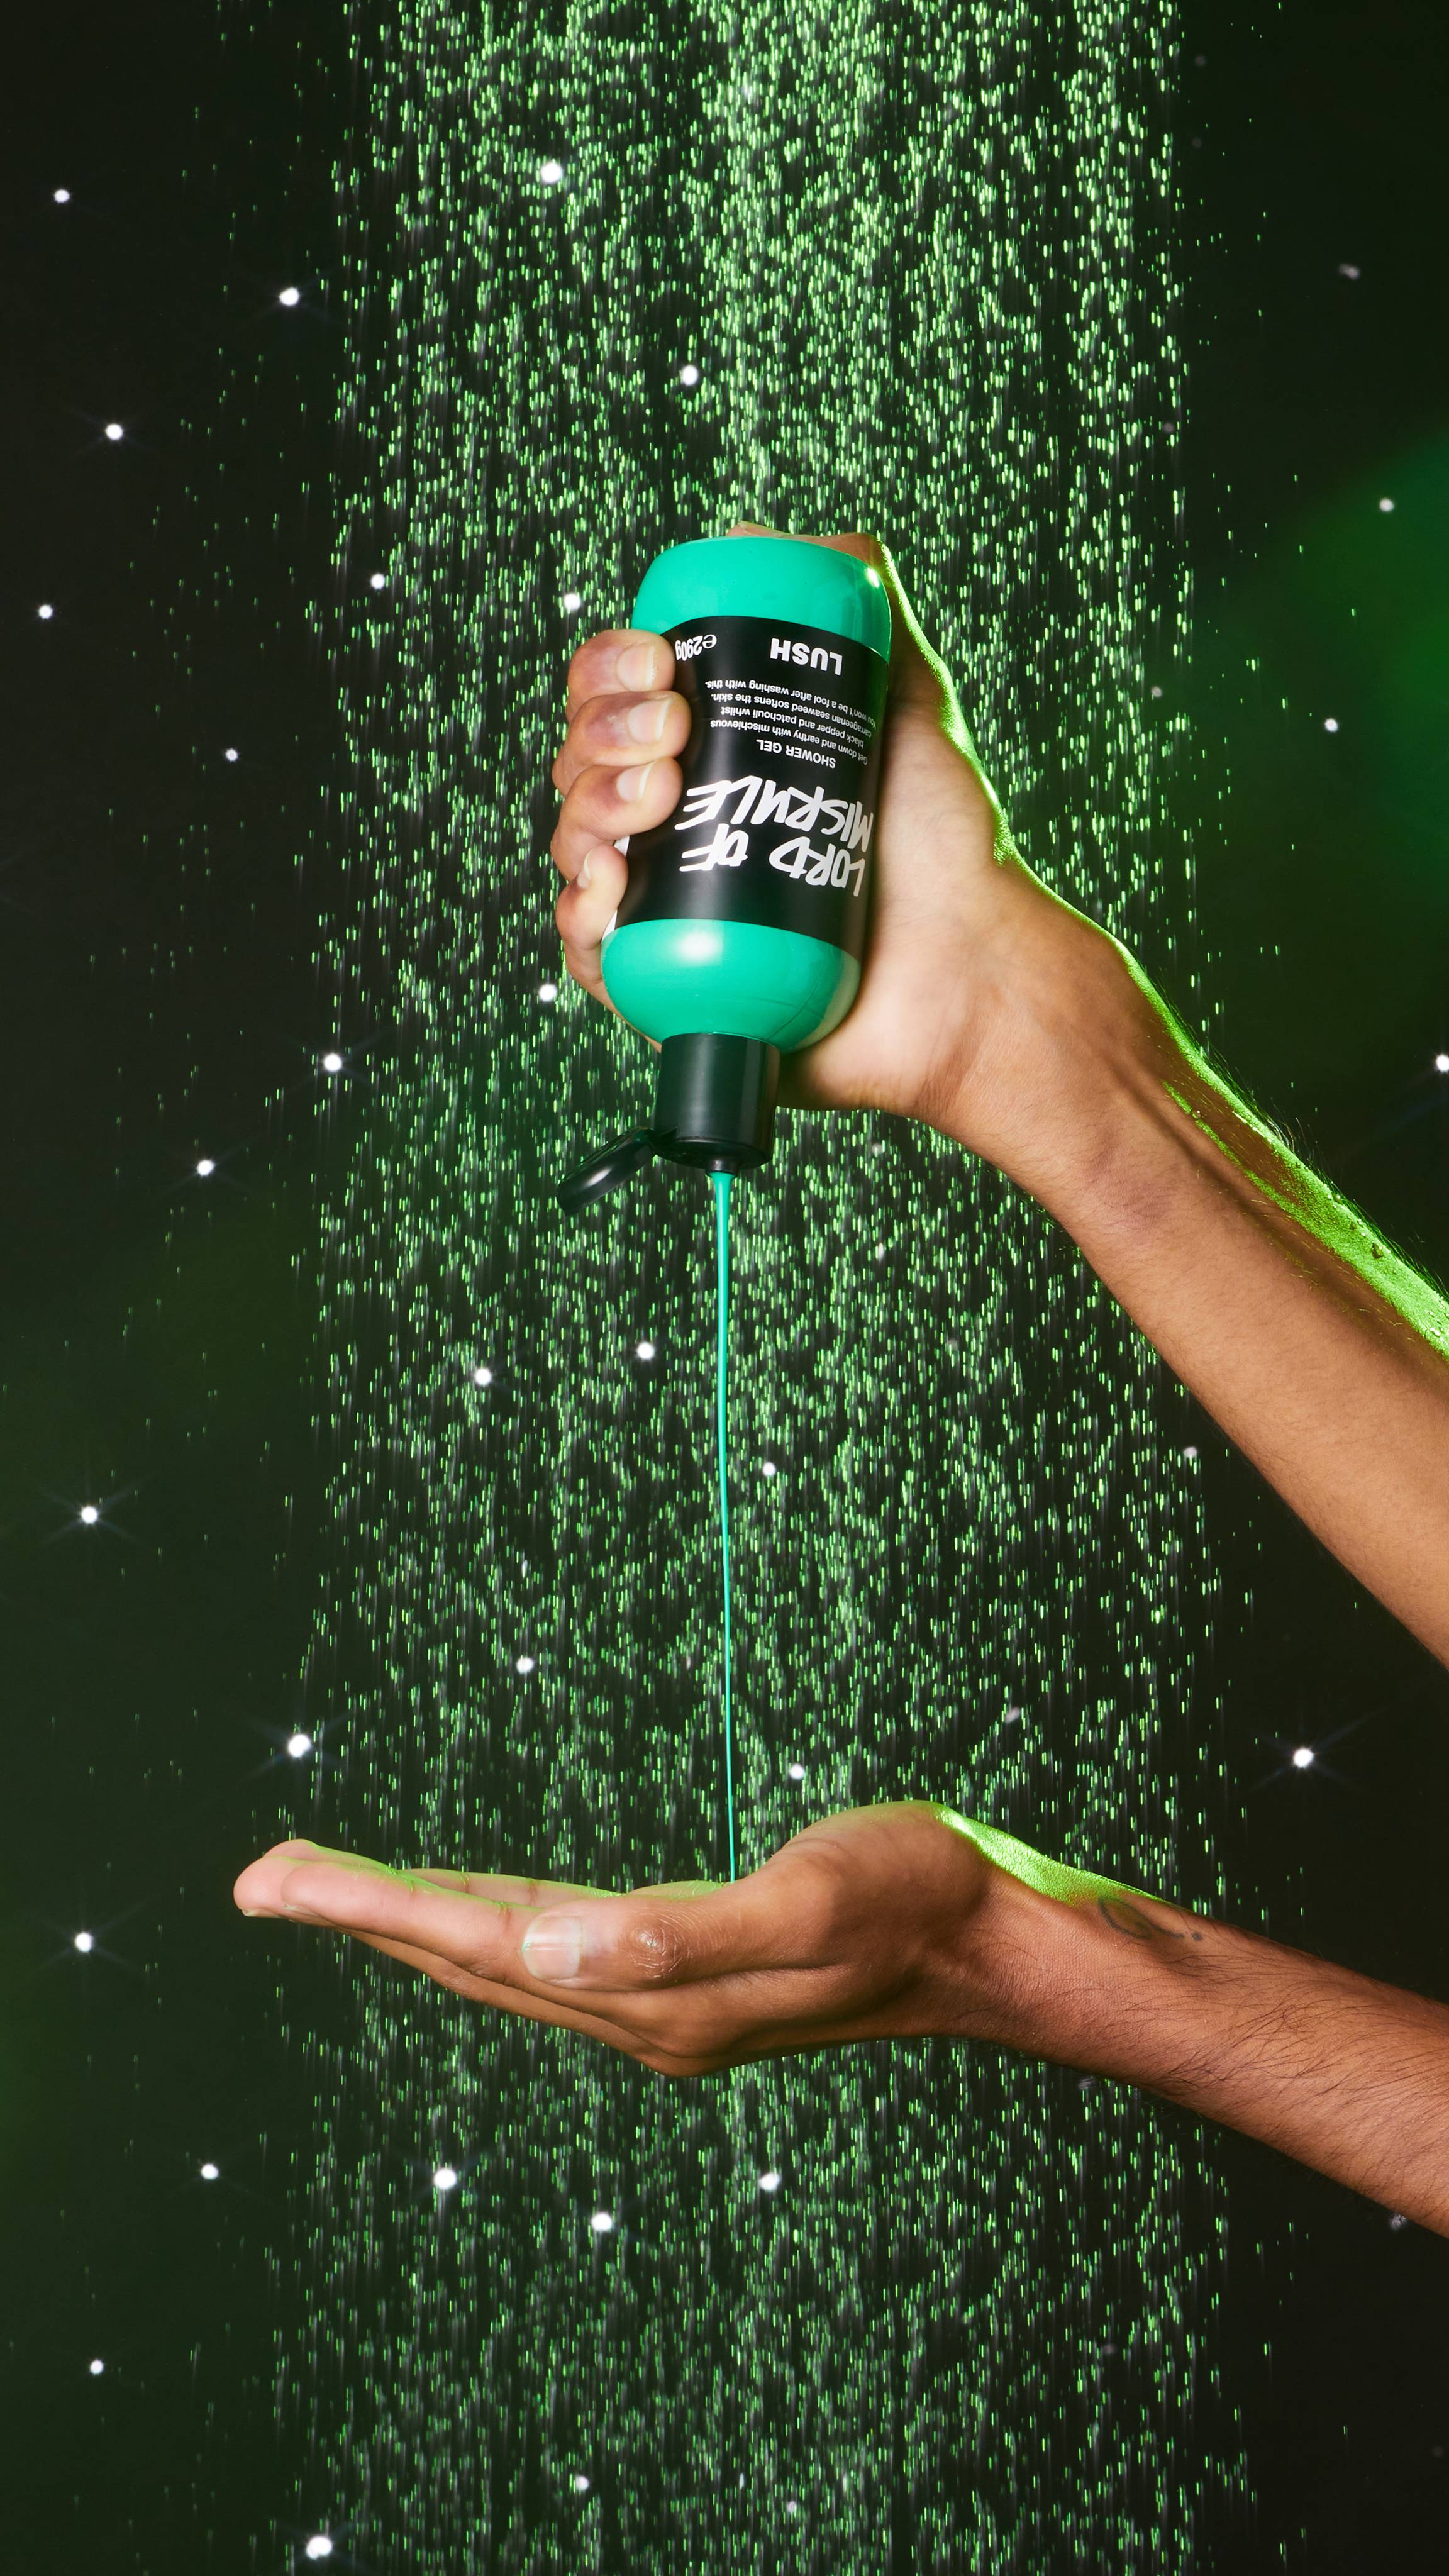  Image shows a close-up of the model squeezing the shower gel from the bottle into their hand on an emerald-green background.